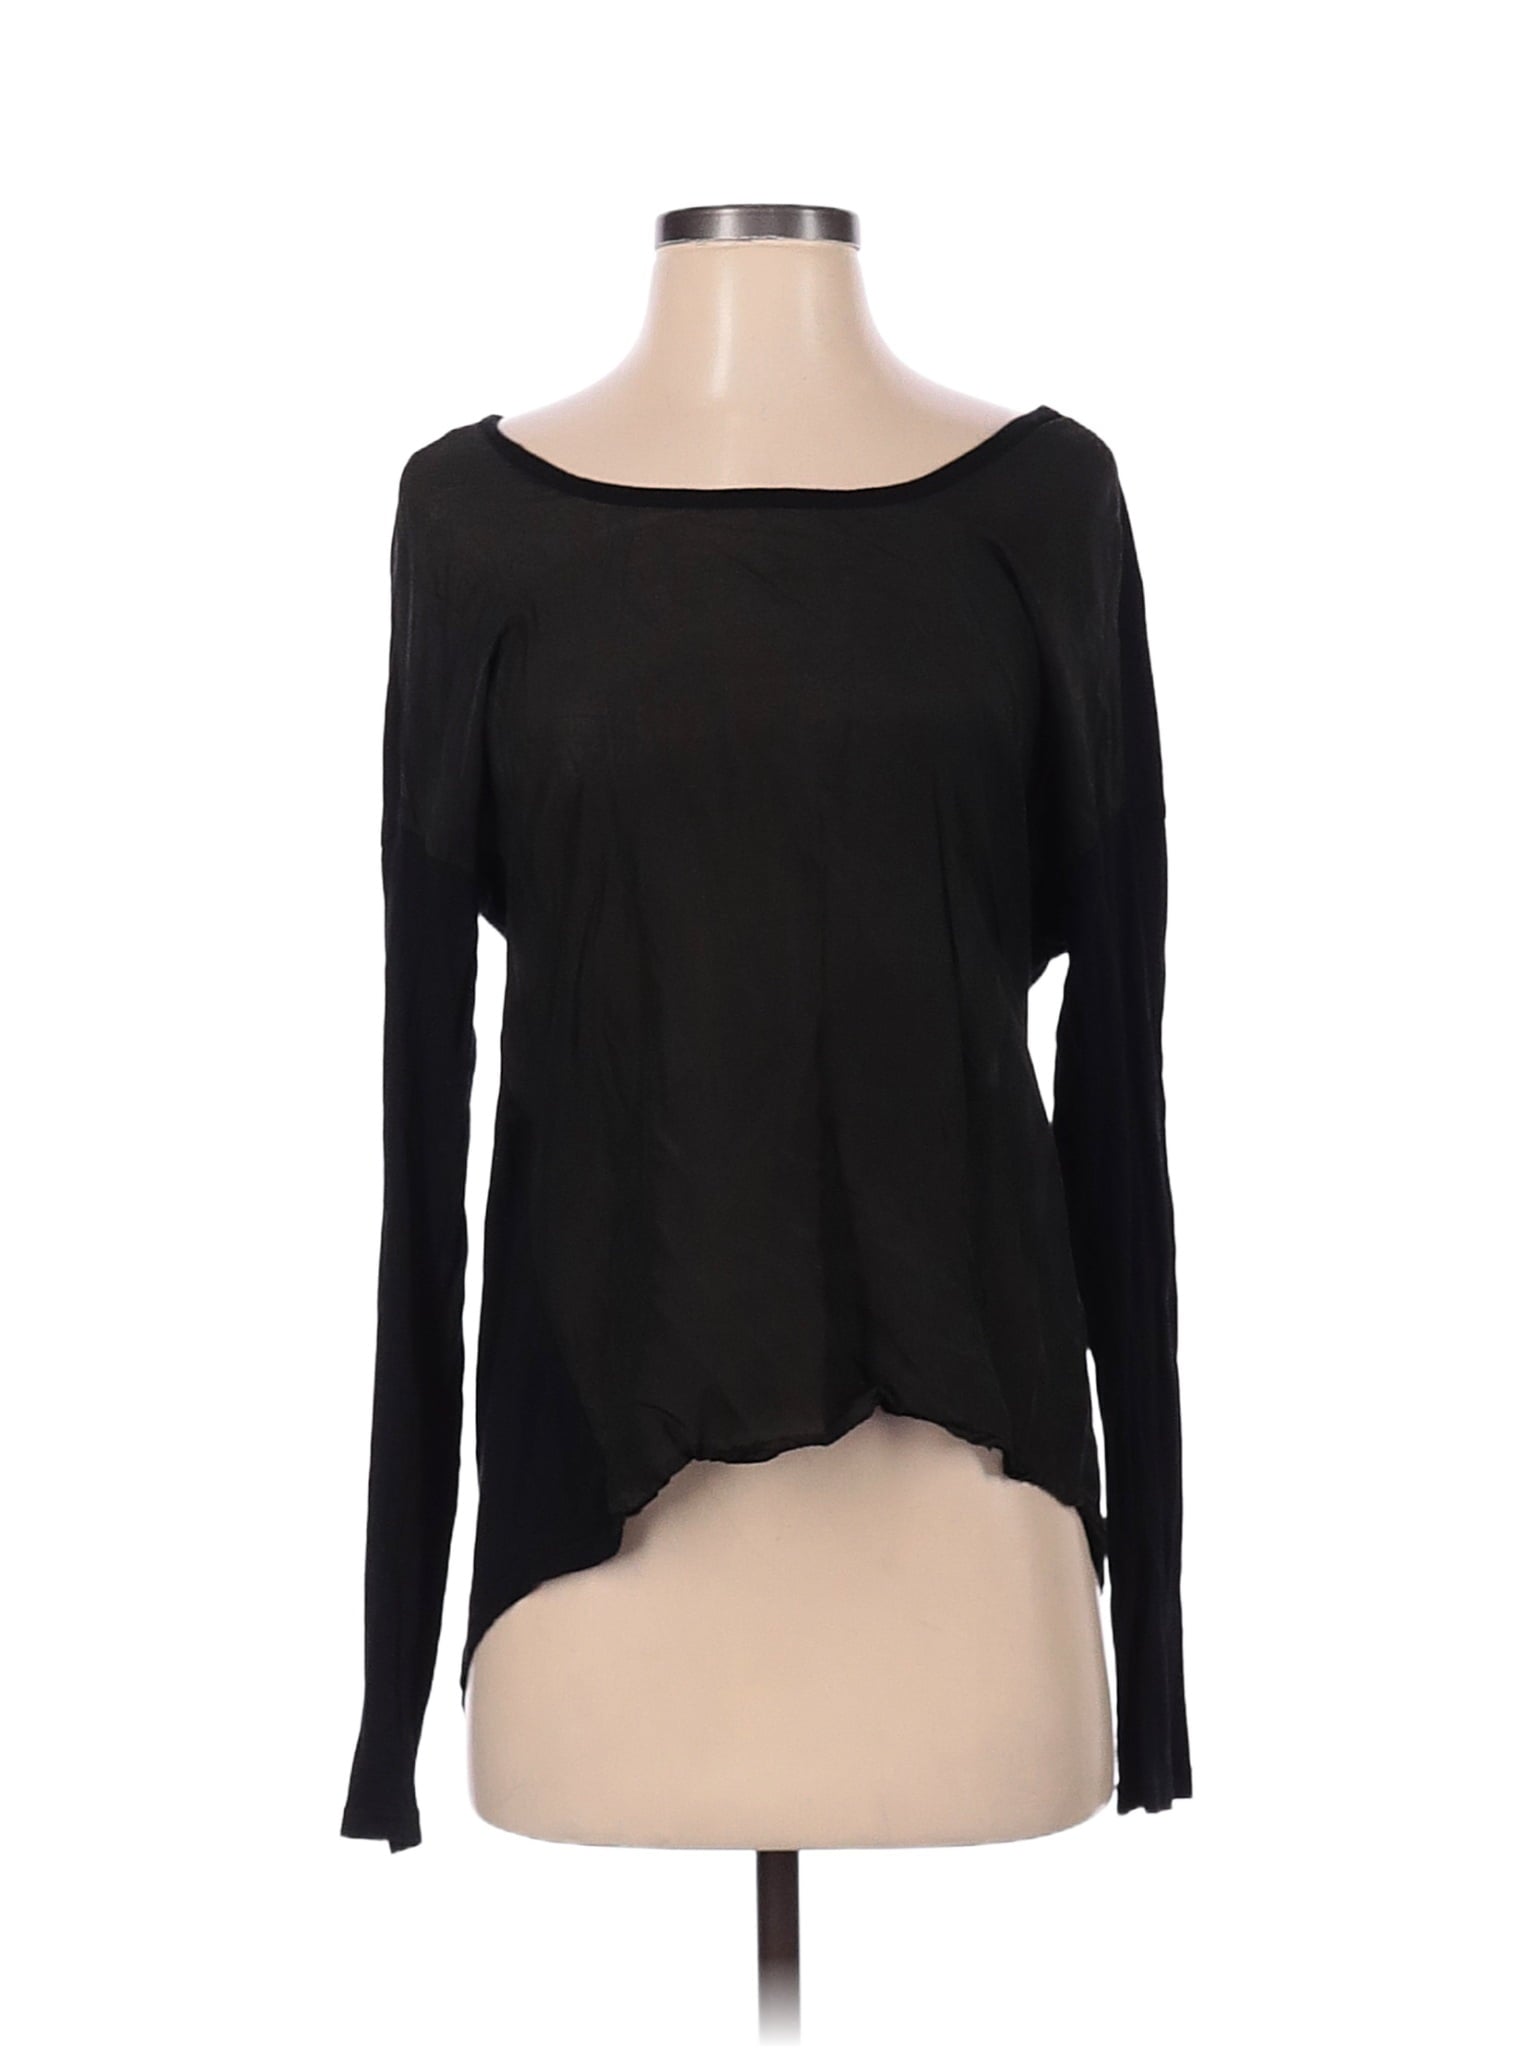 Long Sleeve Top size - Sm (0)